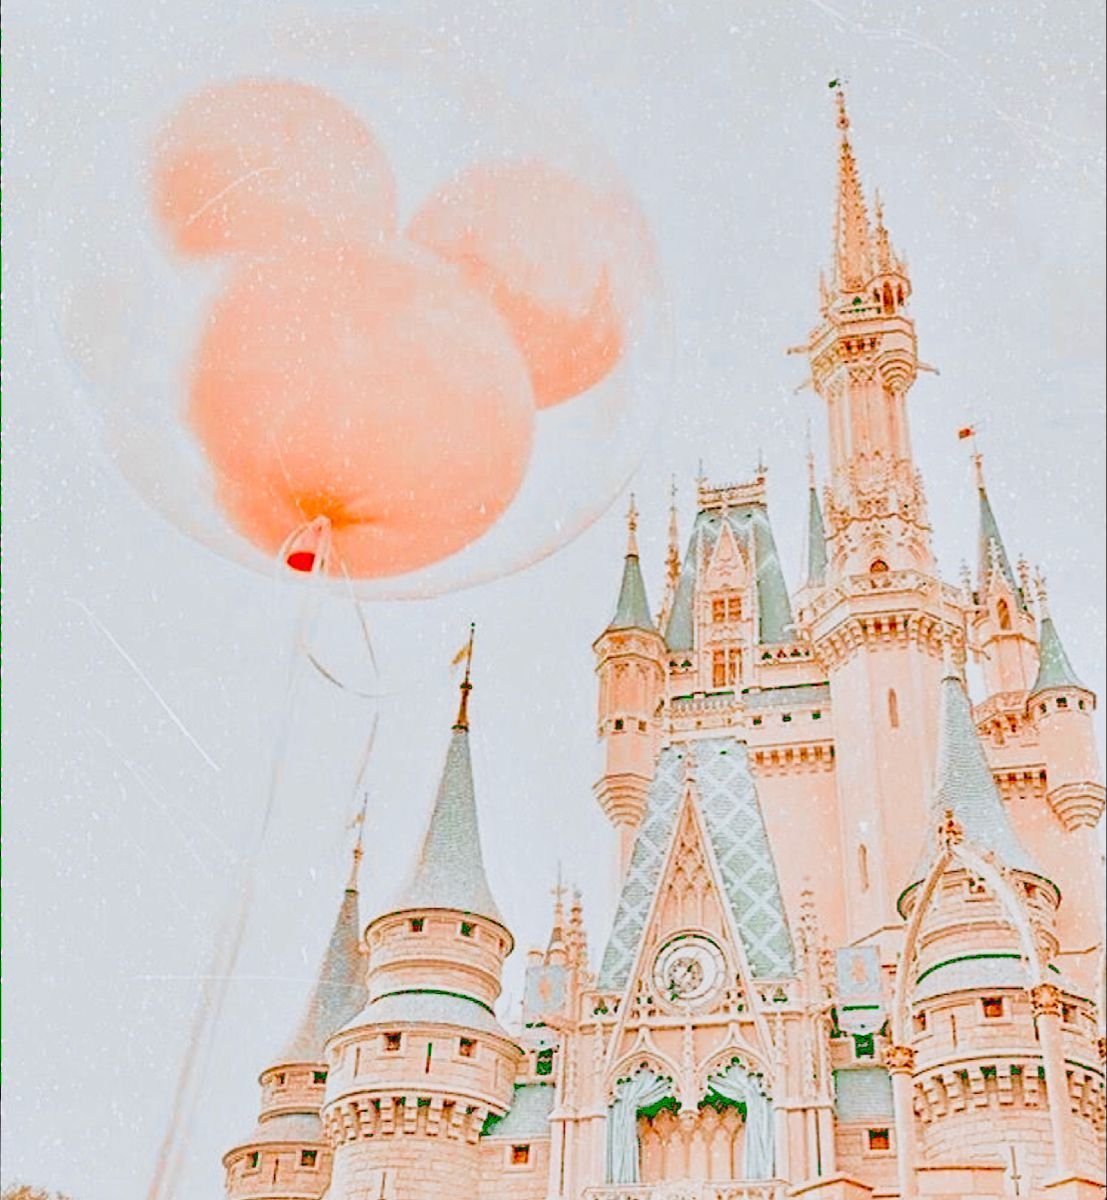 A pink balloon in the shape of Mickey Mouse's head floats in front of the Disney castle. - Disneyland